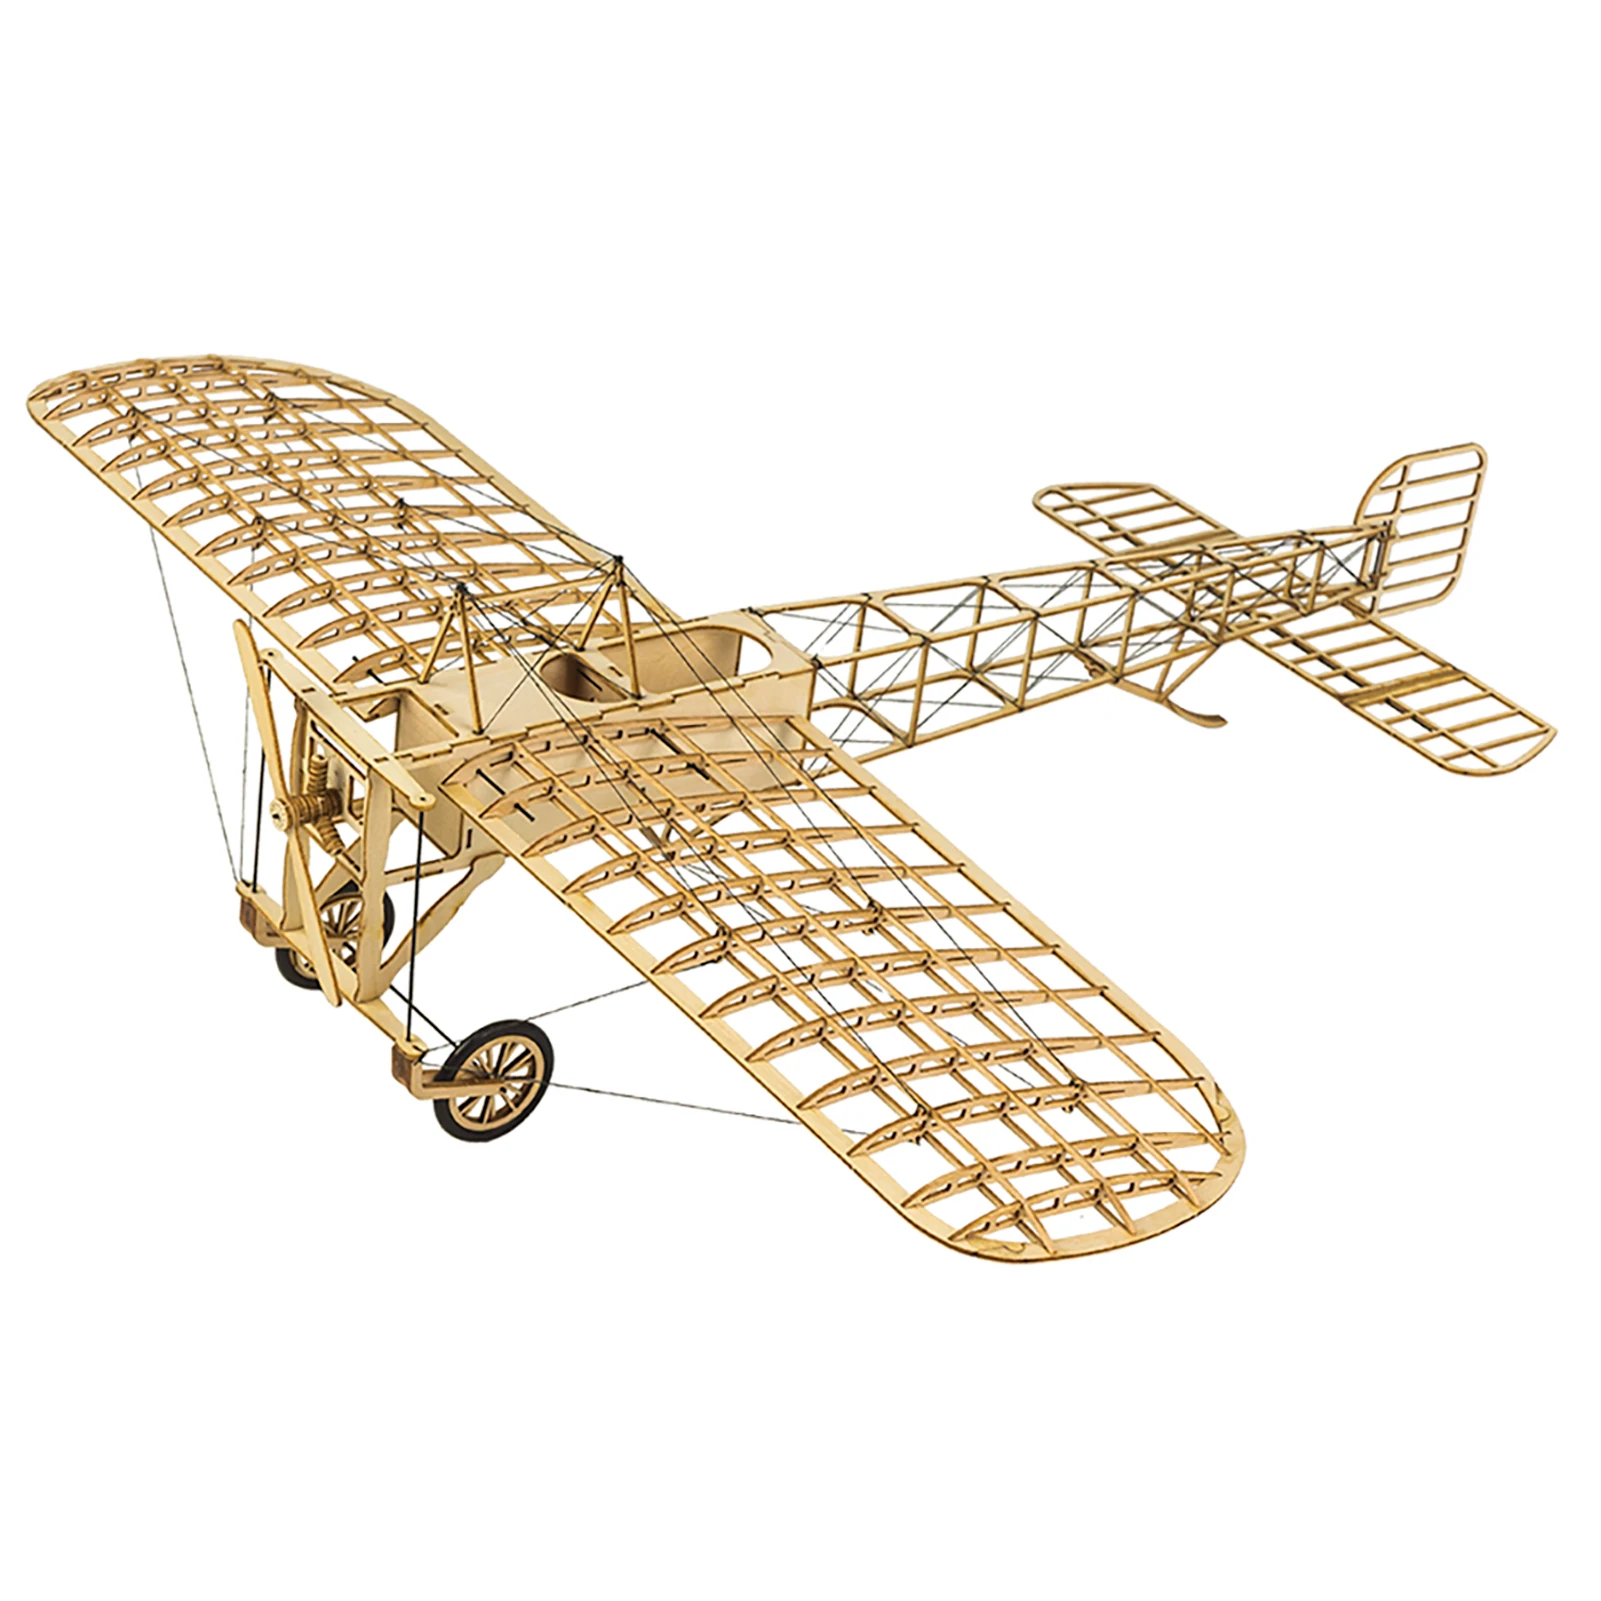 14 1 23 scale 380mm wingspan airplane wooden diy building model bleriot xi aeroplane 3d thumb200